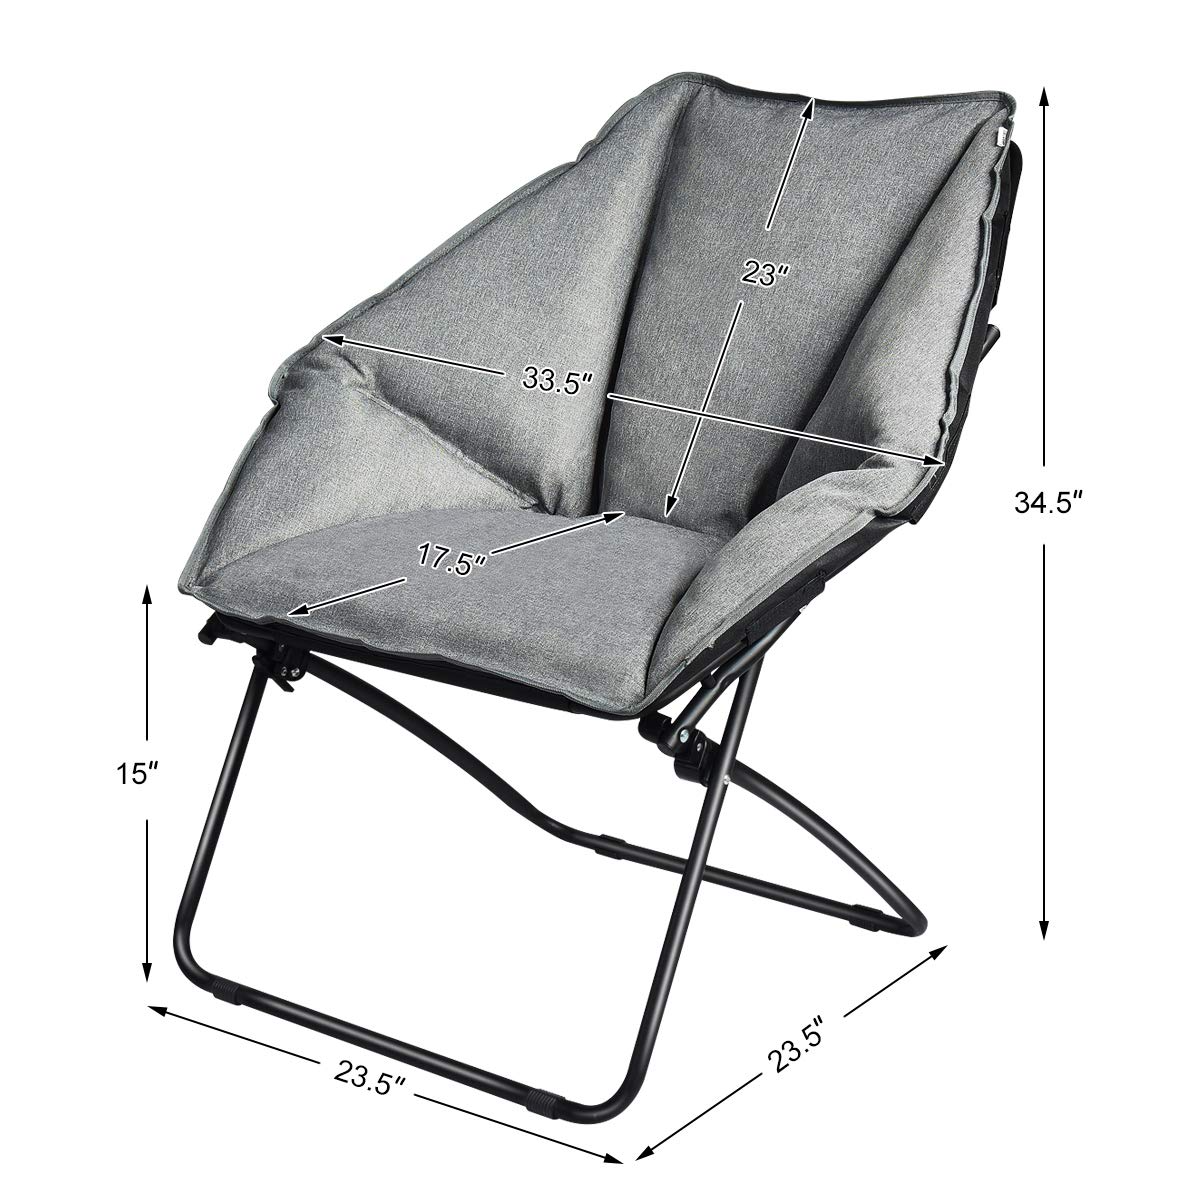 Giantex Folding Saucer Chair, Padded Moon Round Chair with Sturdy Iron Frame